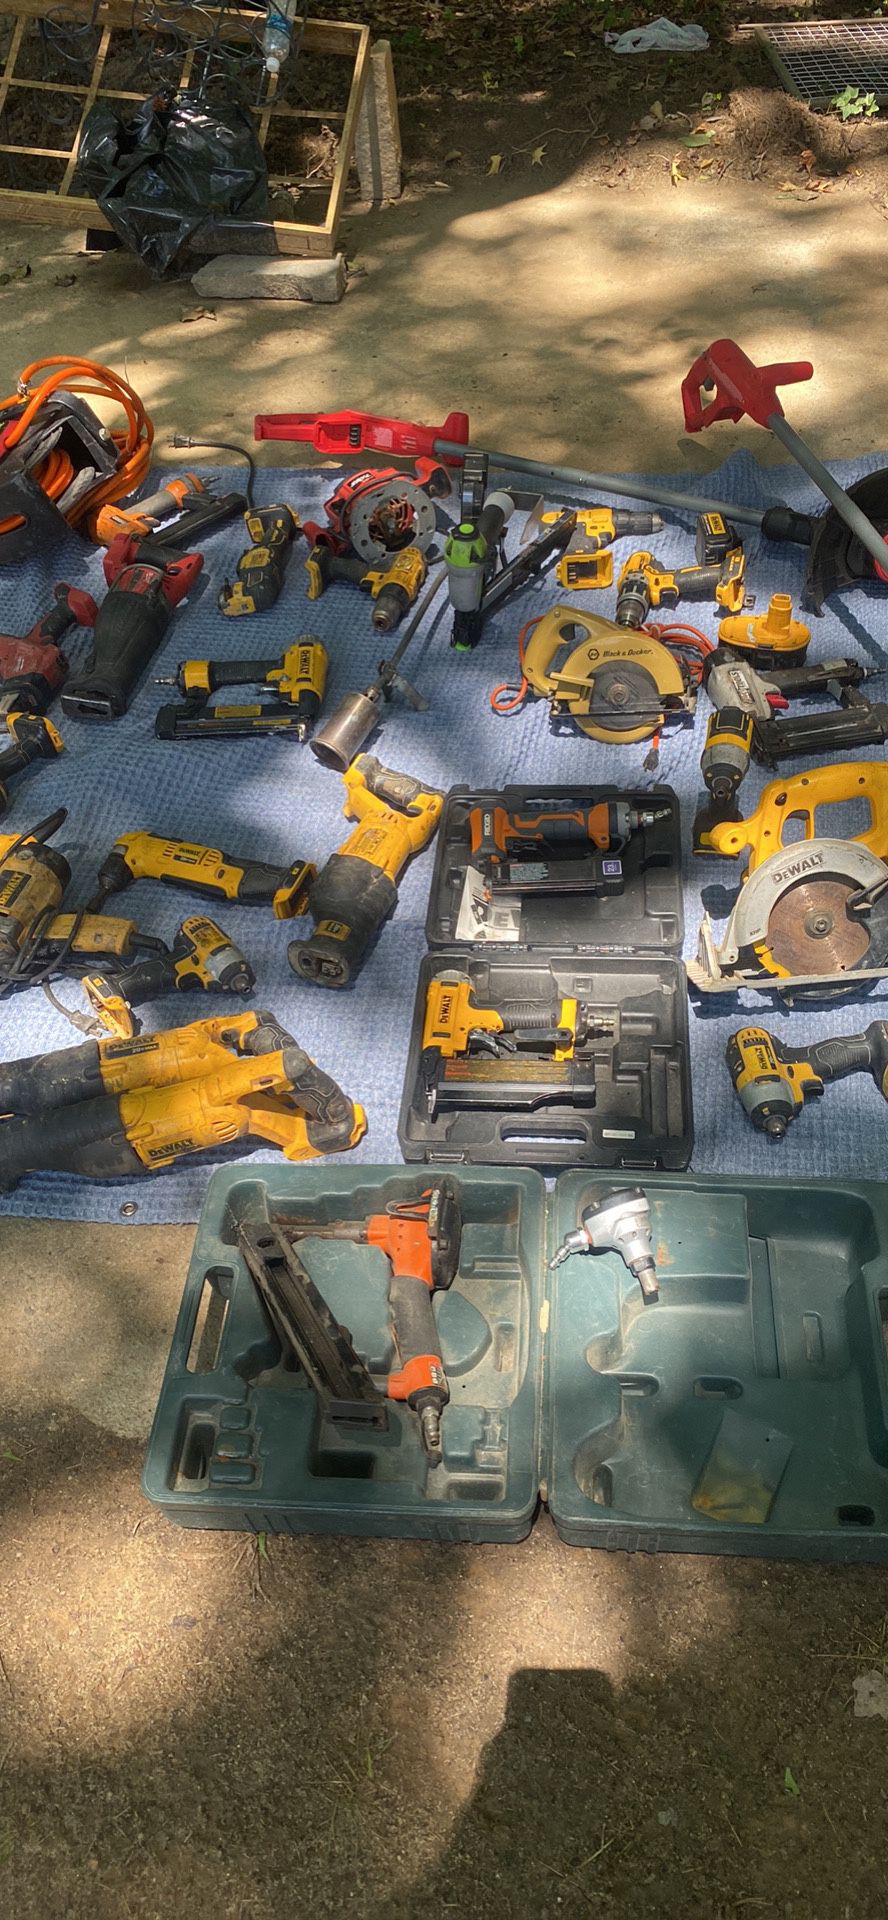 Used tool in good condition opportunity price prices range from $50 to $390 Warranty 1 month.   There is a guarantee of what you pay in credit for ano